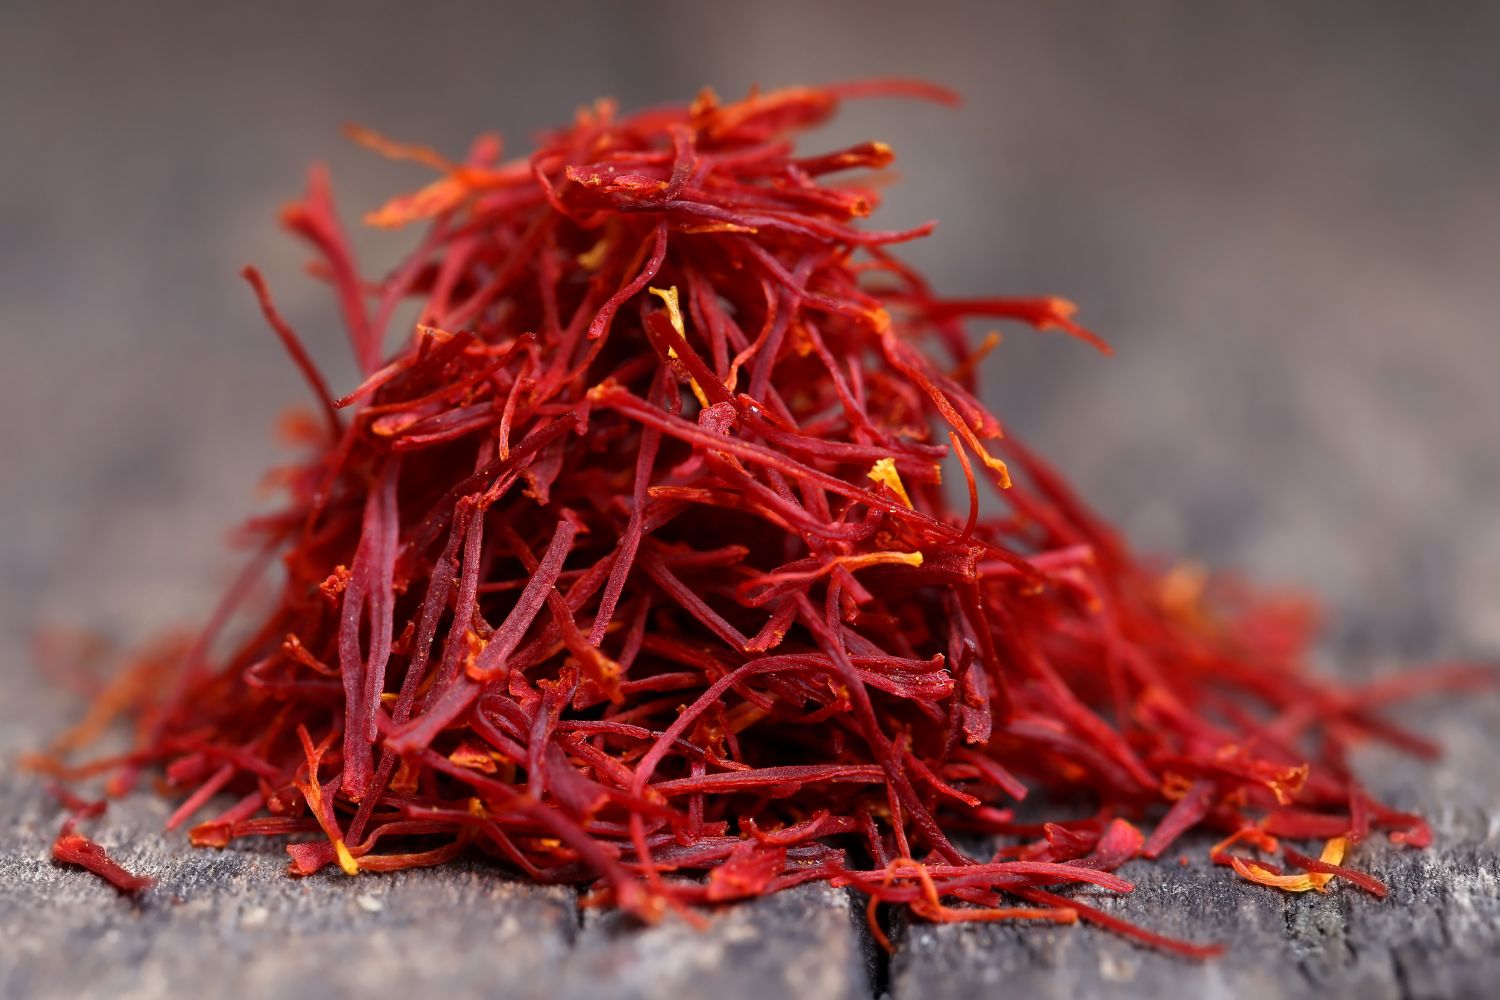 How to use saffron, how to use saffron in cooking, how to use saffron threads